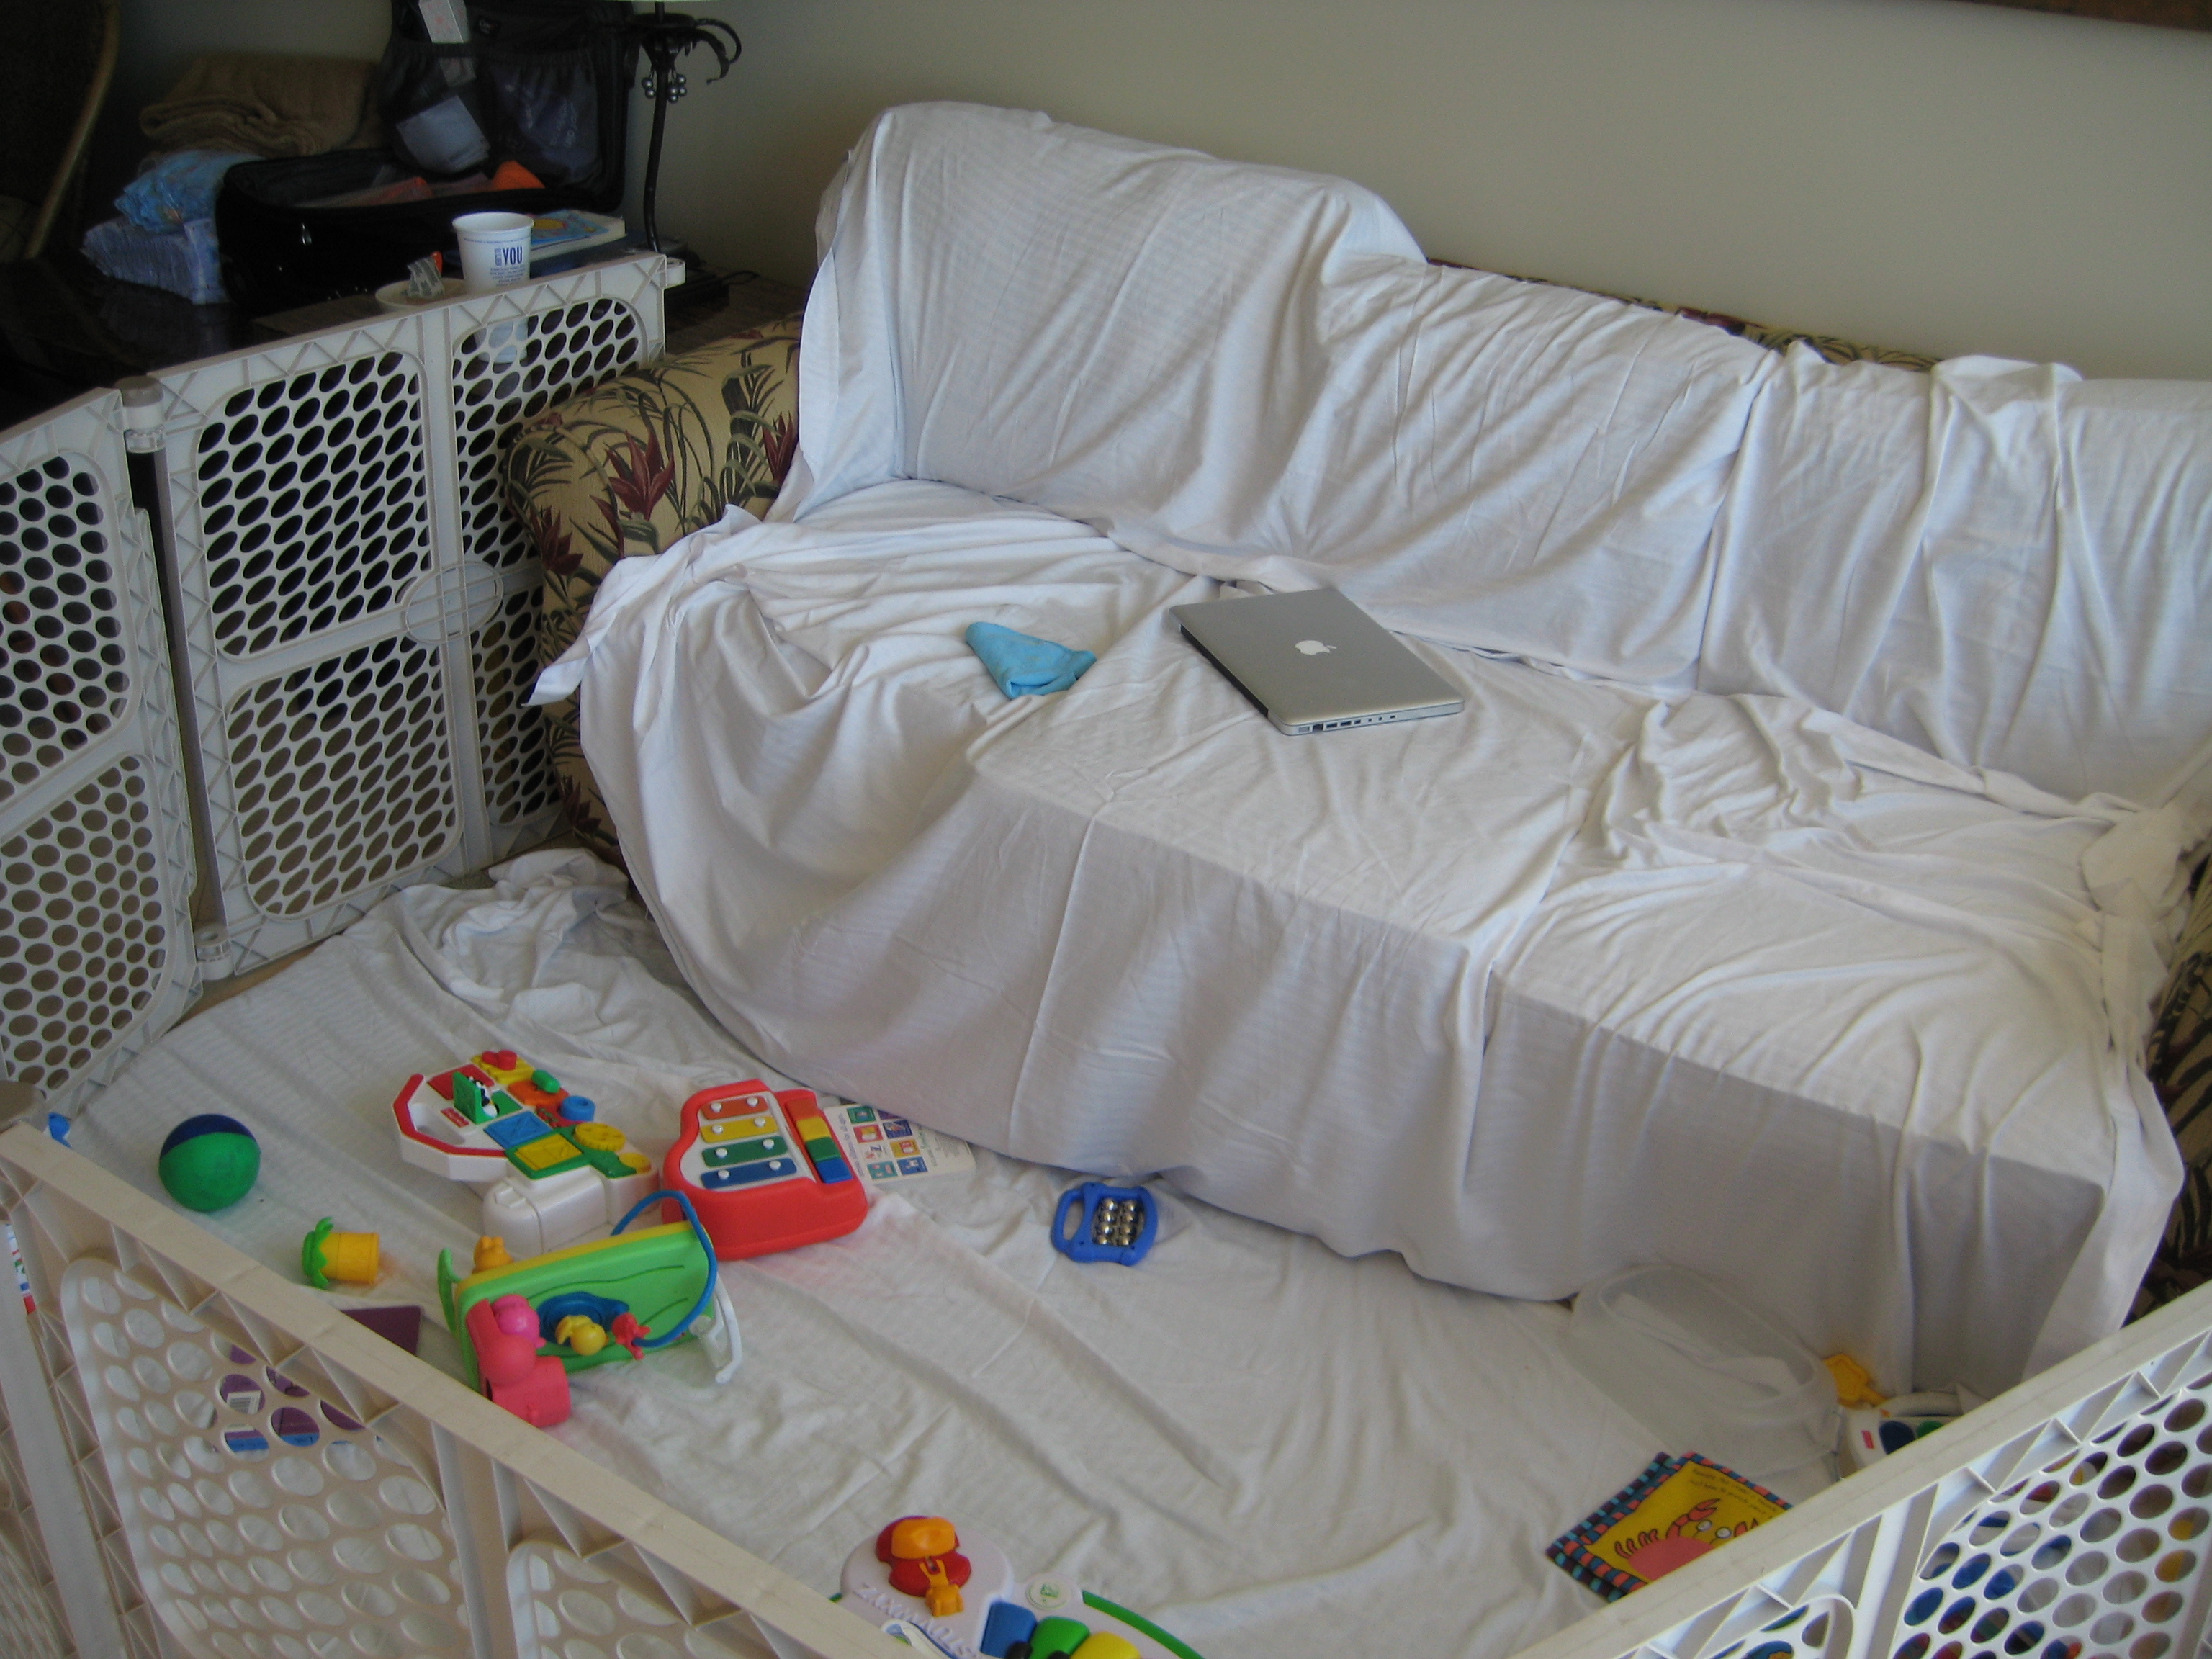 How to Babyproof a hotel room